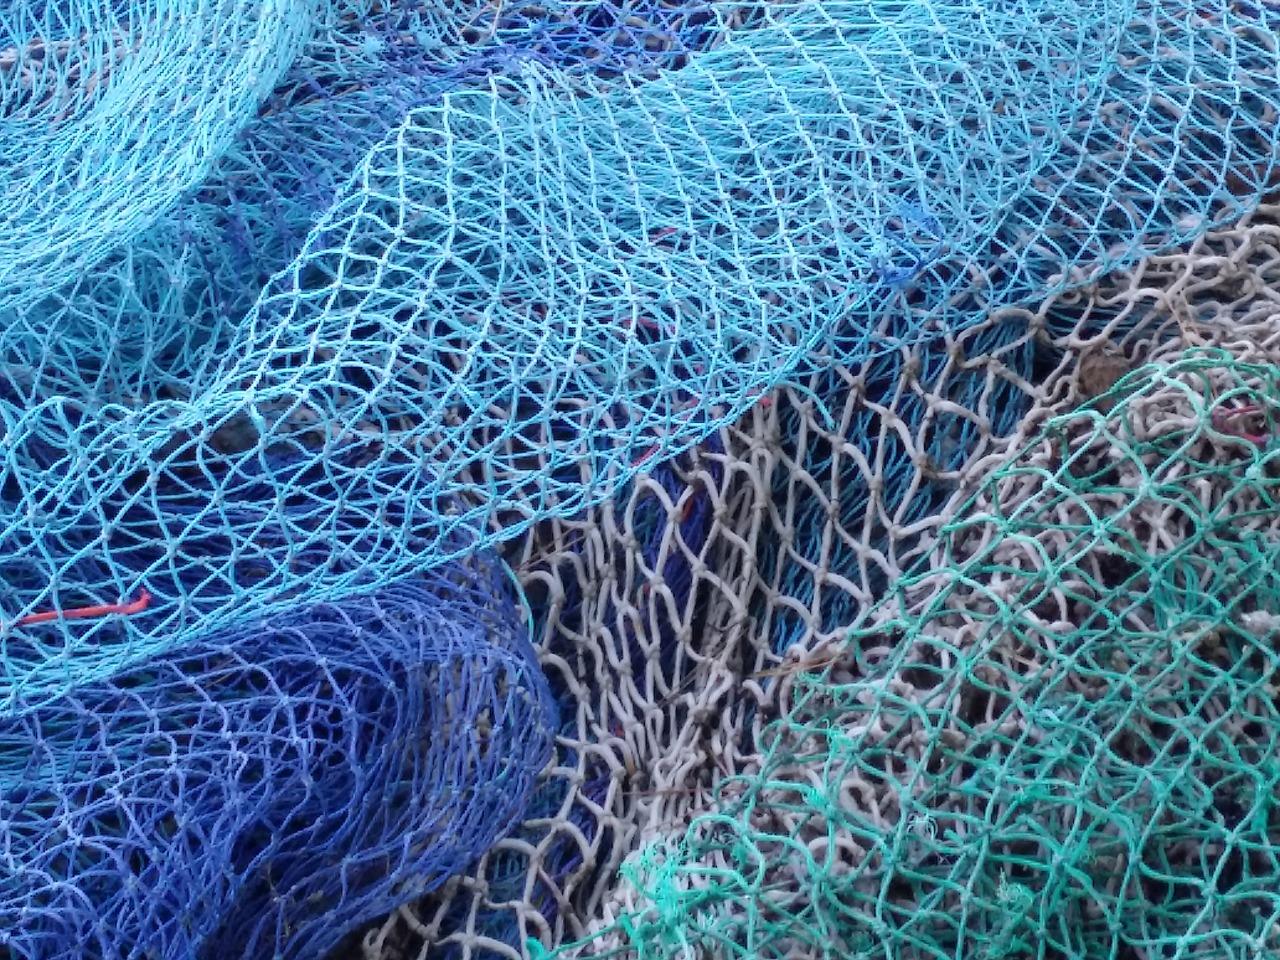 When fishermen can't go to sea, they mend their nets - ReasonTalk